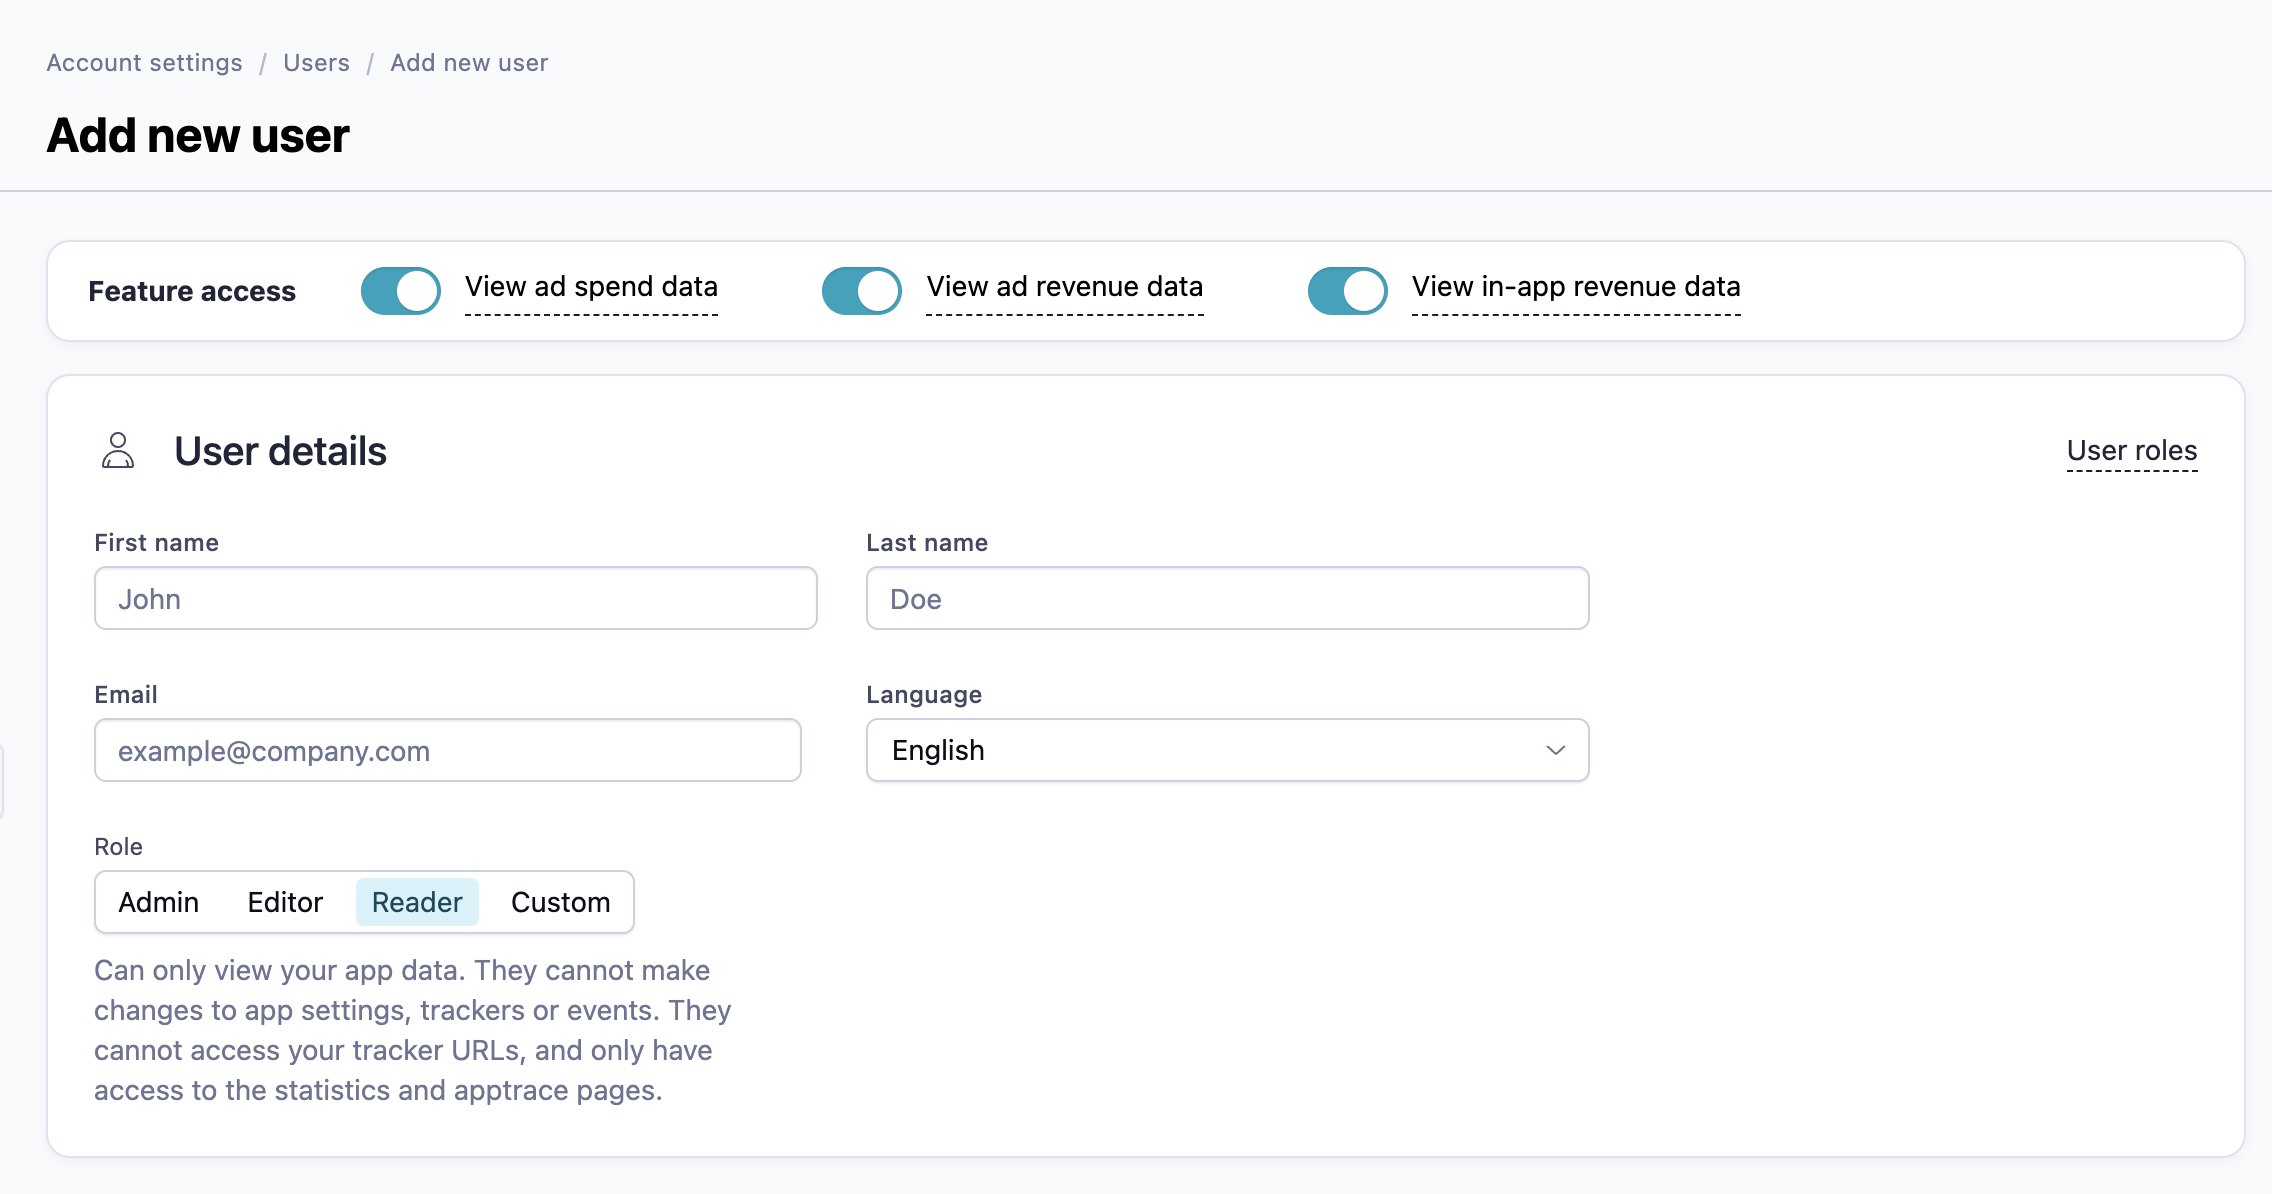 A screenshot of how to add a new user in the dashboard.